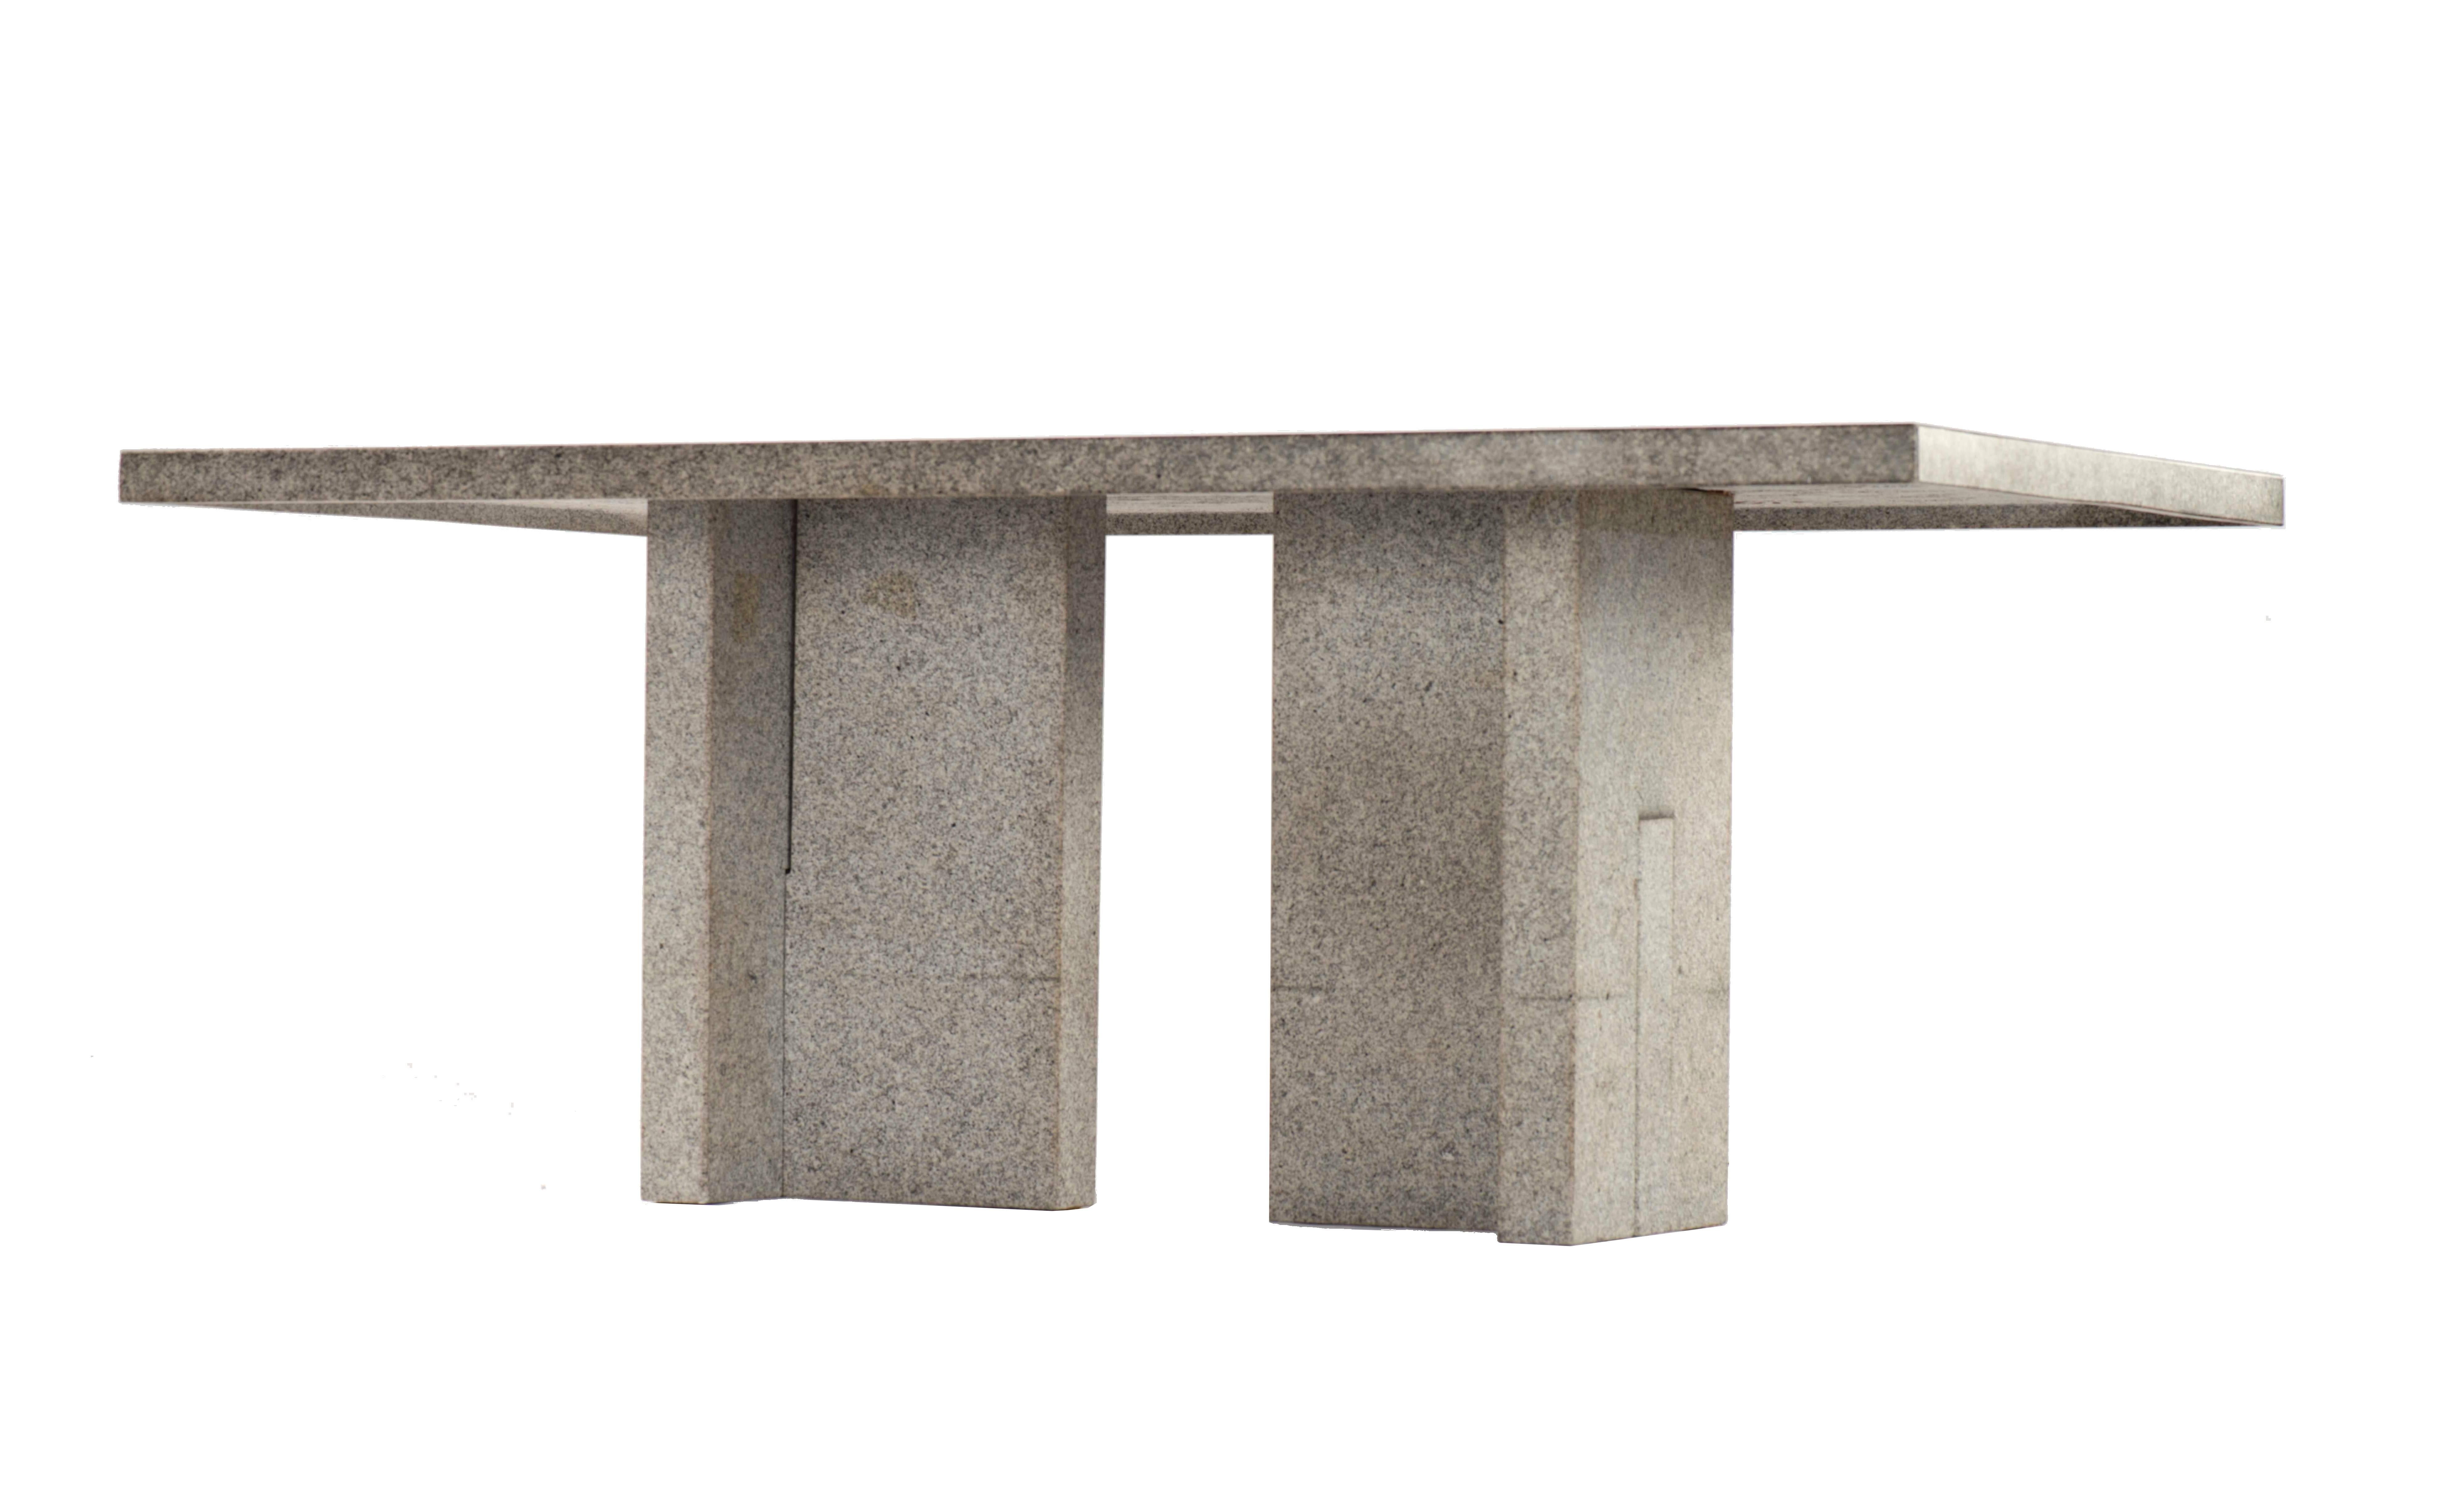 A rare granite dining table designed specifically for a 1960's Marcel Breuer & Associates residential project. Granite tables were a feature included in some residential and commercial structures designed by Marcel Breuer during his career. Two